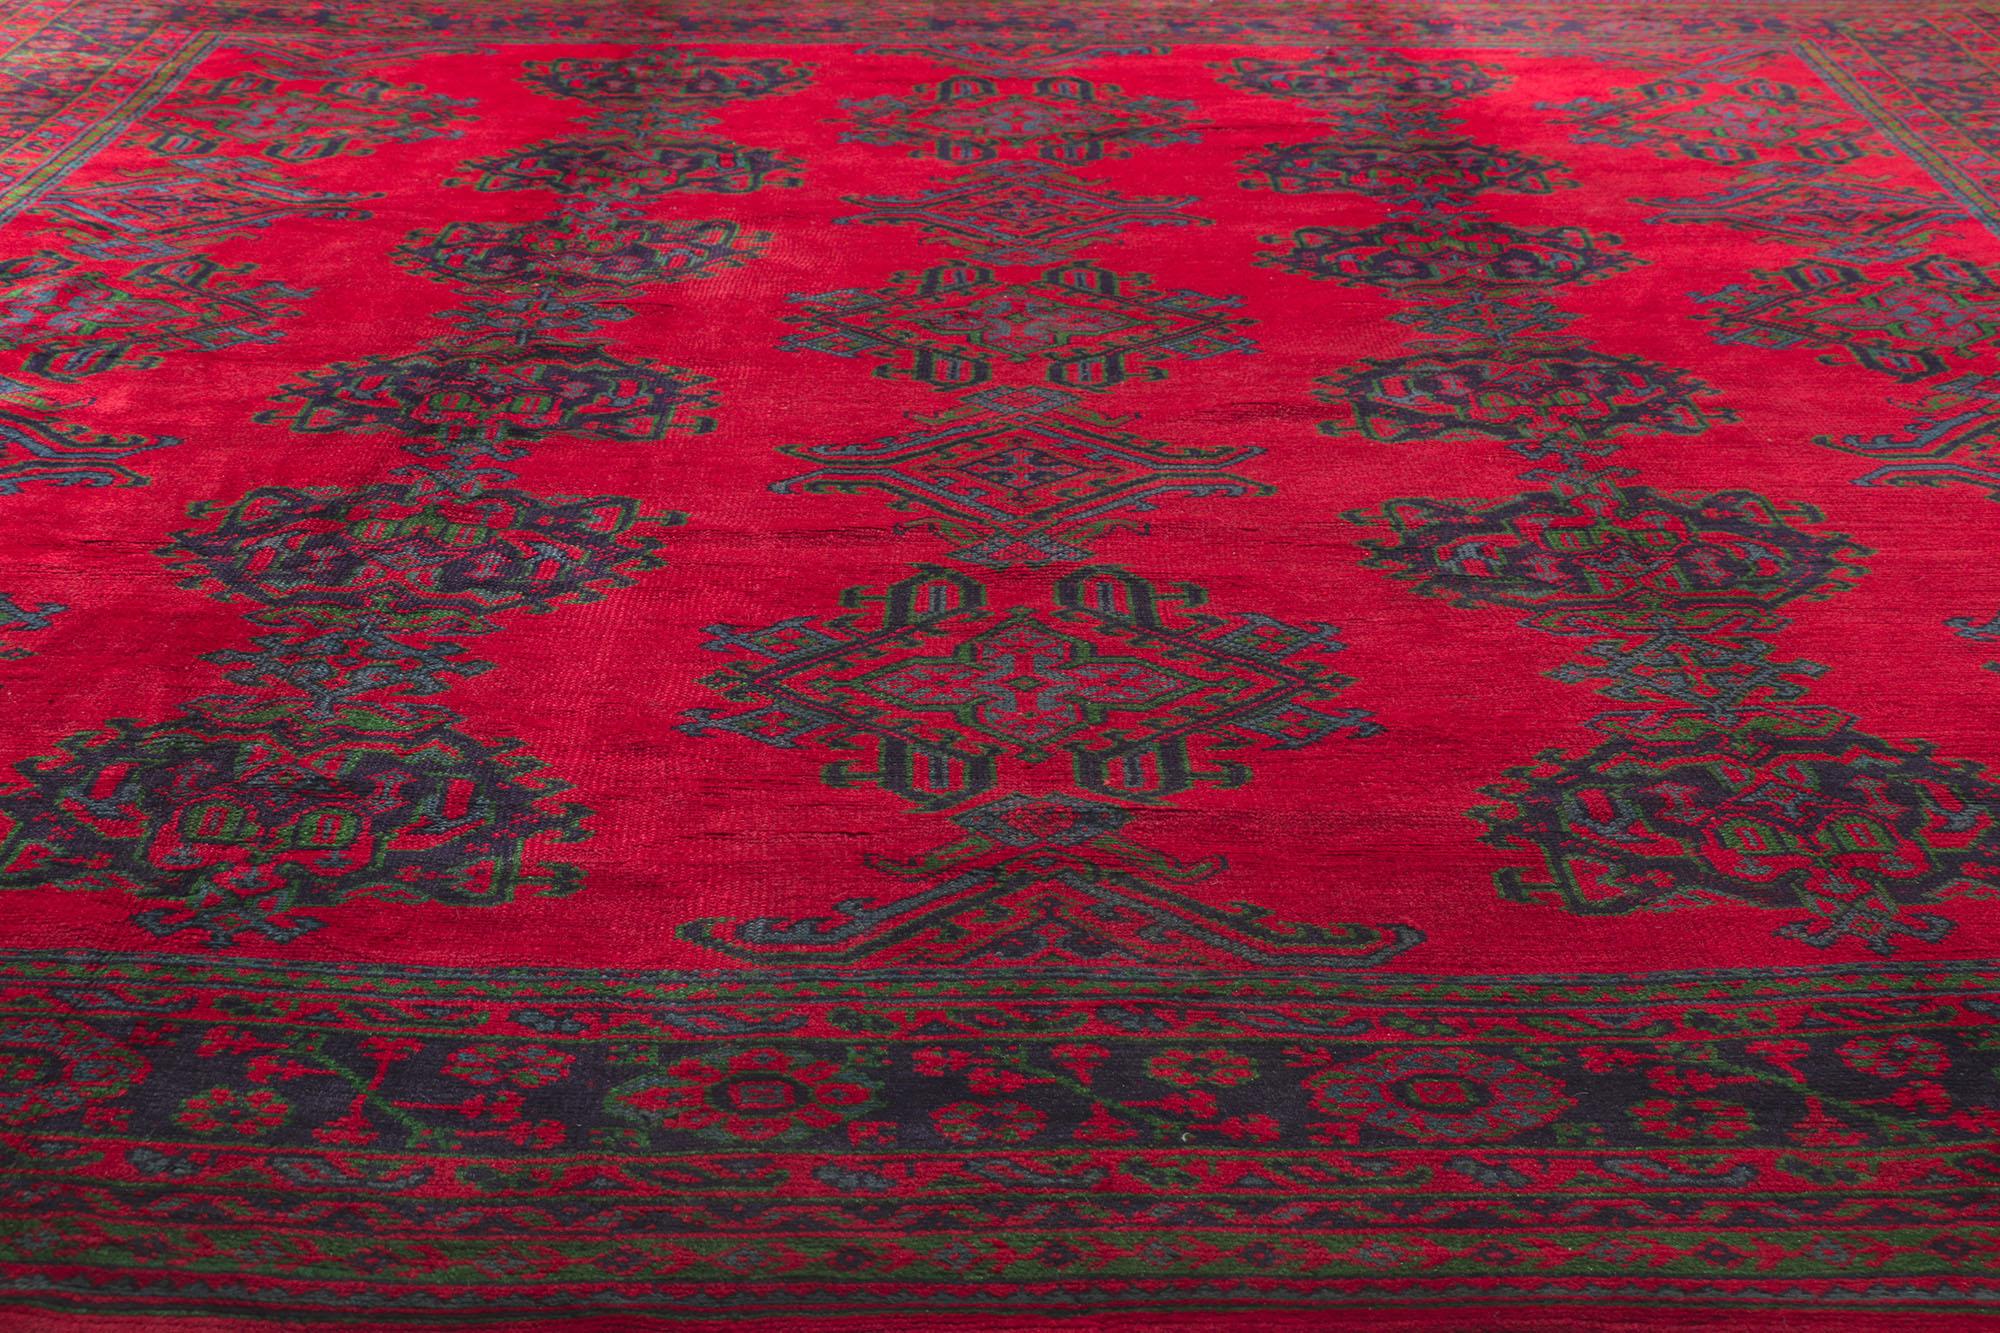 Antique Red Turkish Oushak Rug Inspired by Thomas Eakins In Good Condition For Sale In Dallas, TX